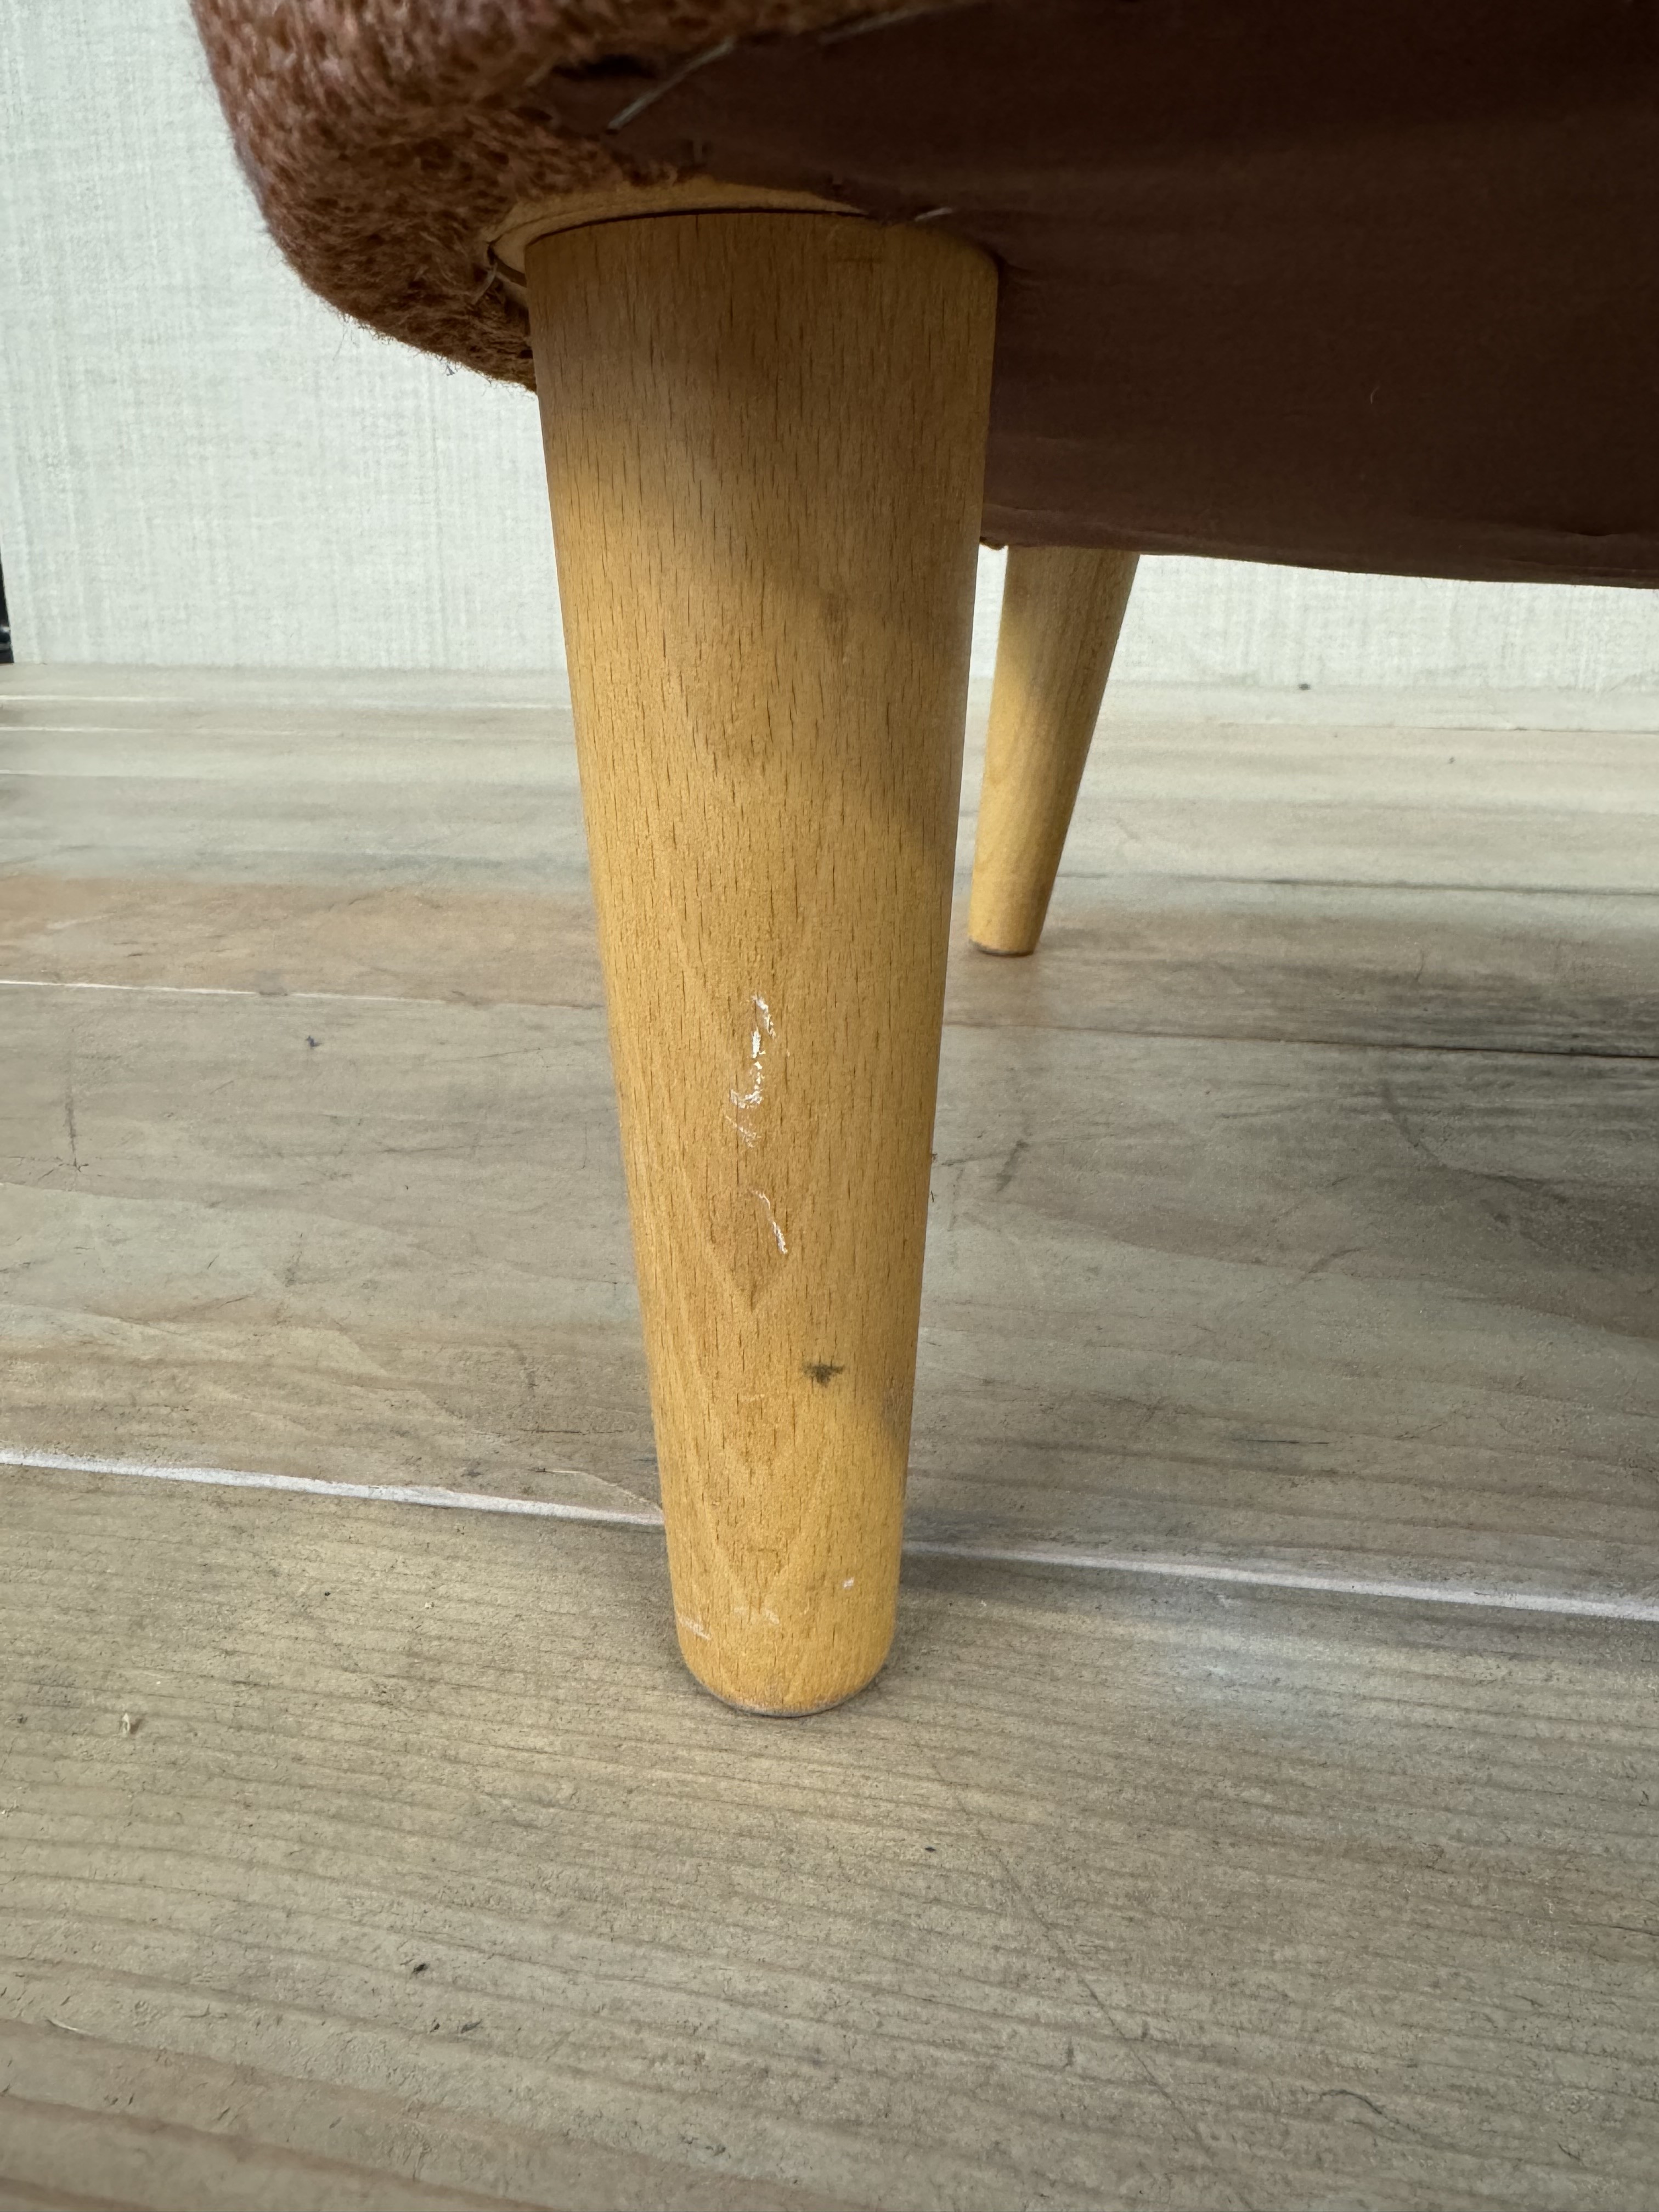 a close up of a wooden chair on a tile floor